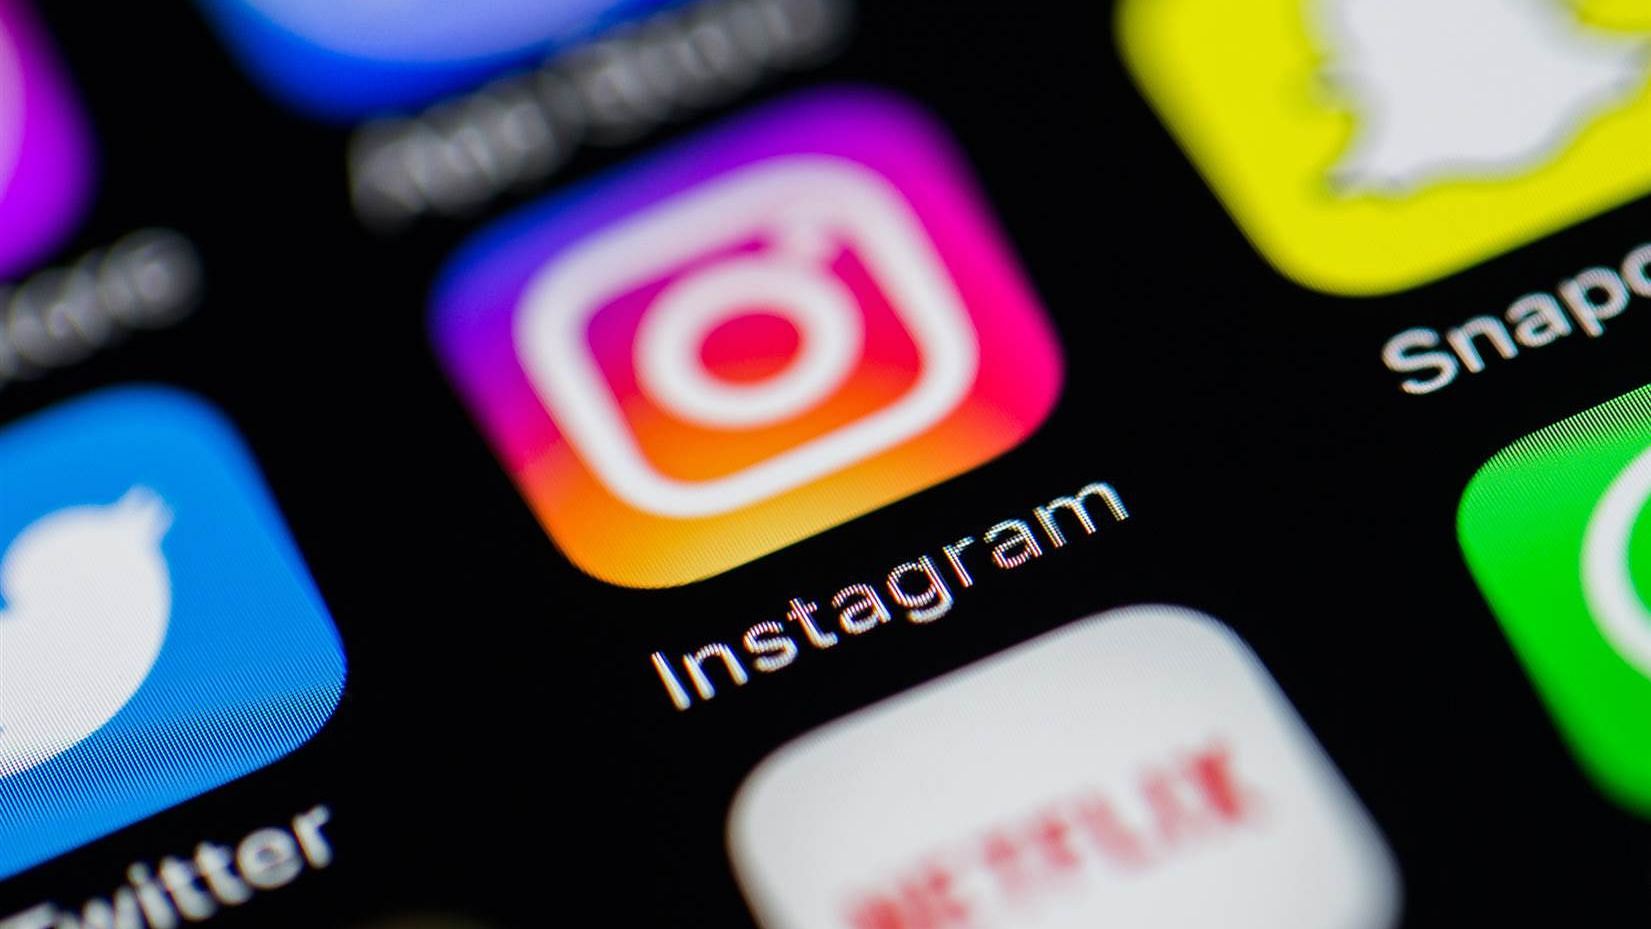 Instagram is popular for its influencer base and promoting brand activities.